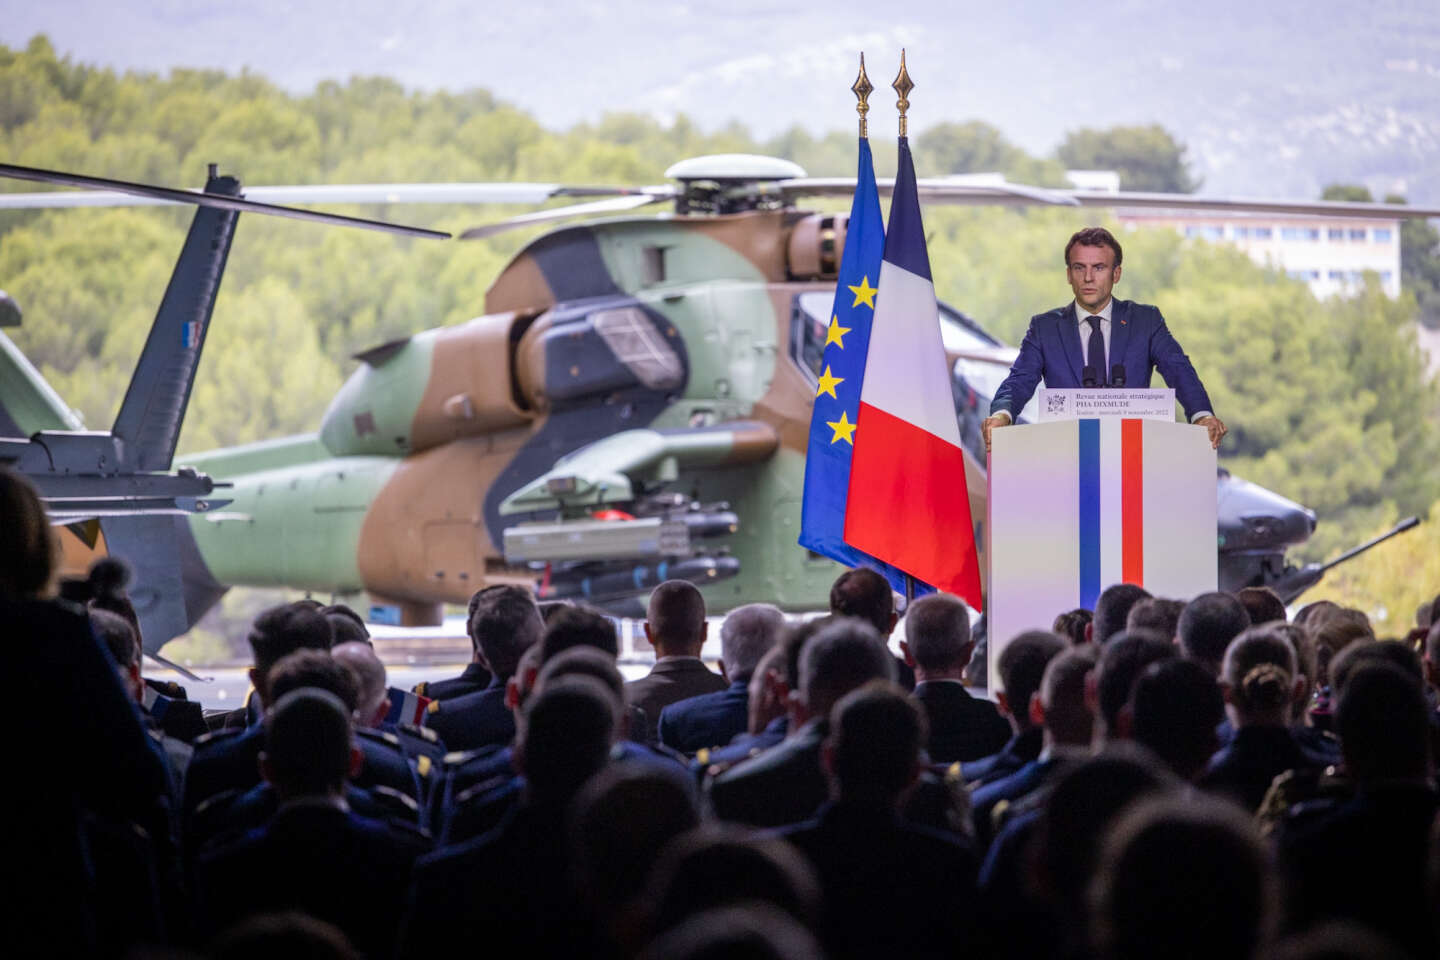 For Emmanuel Macron, the French nuclear forces “contribute” to the security of Europe